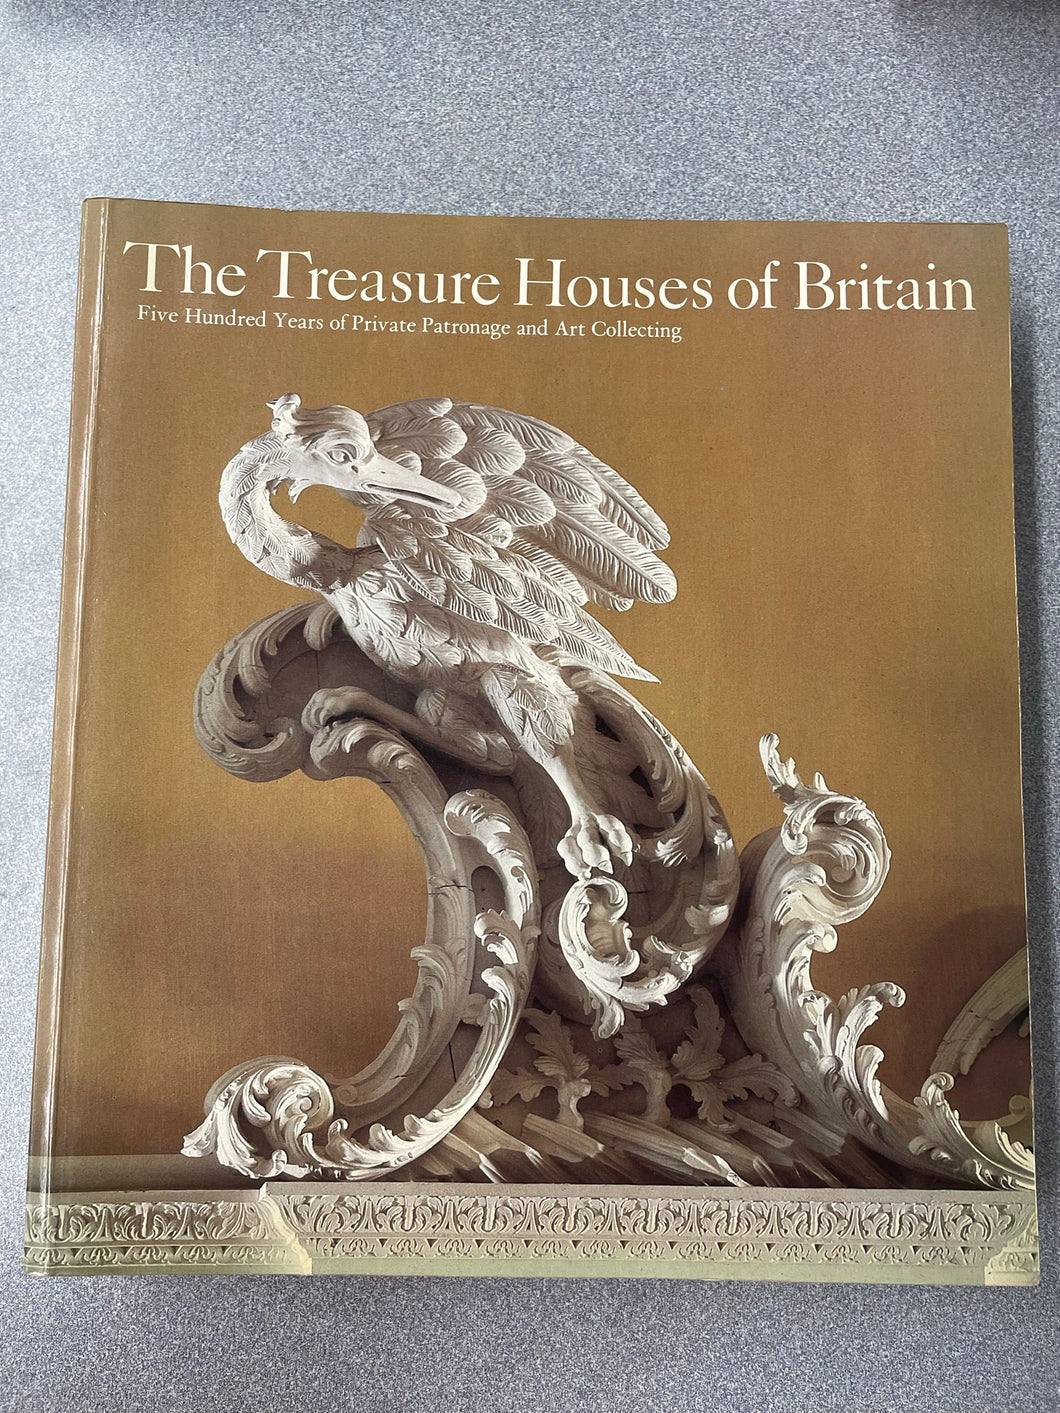 The Treasure Houses of Britain: Five Hundred Years of Private Patronage and Art Collecting, Yakush, Mary, ed. [1985] A 4/23